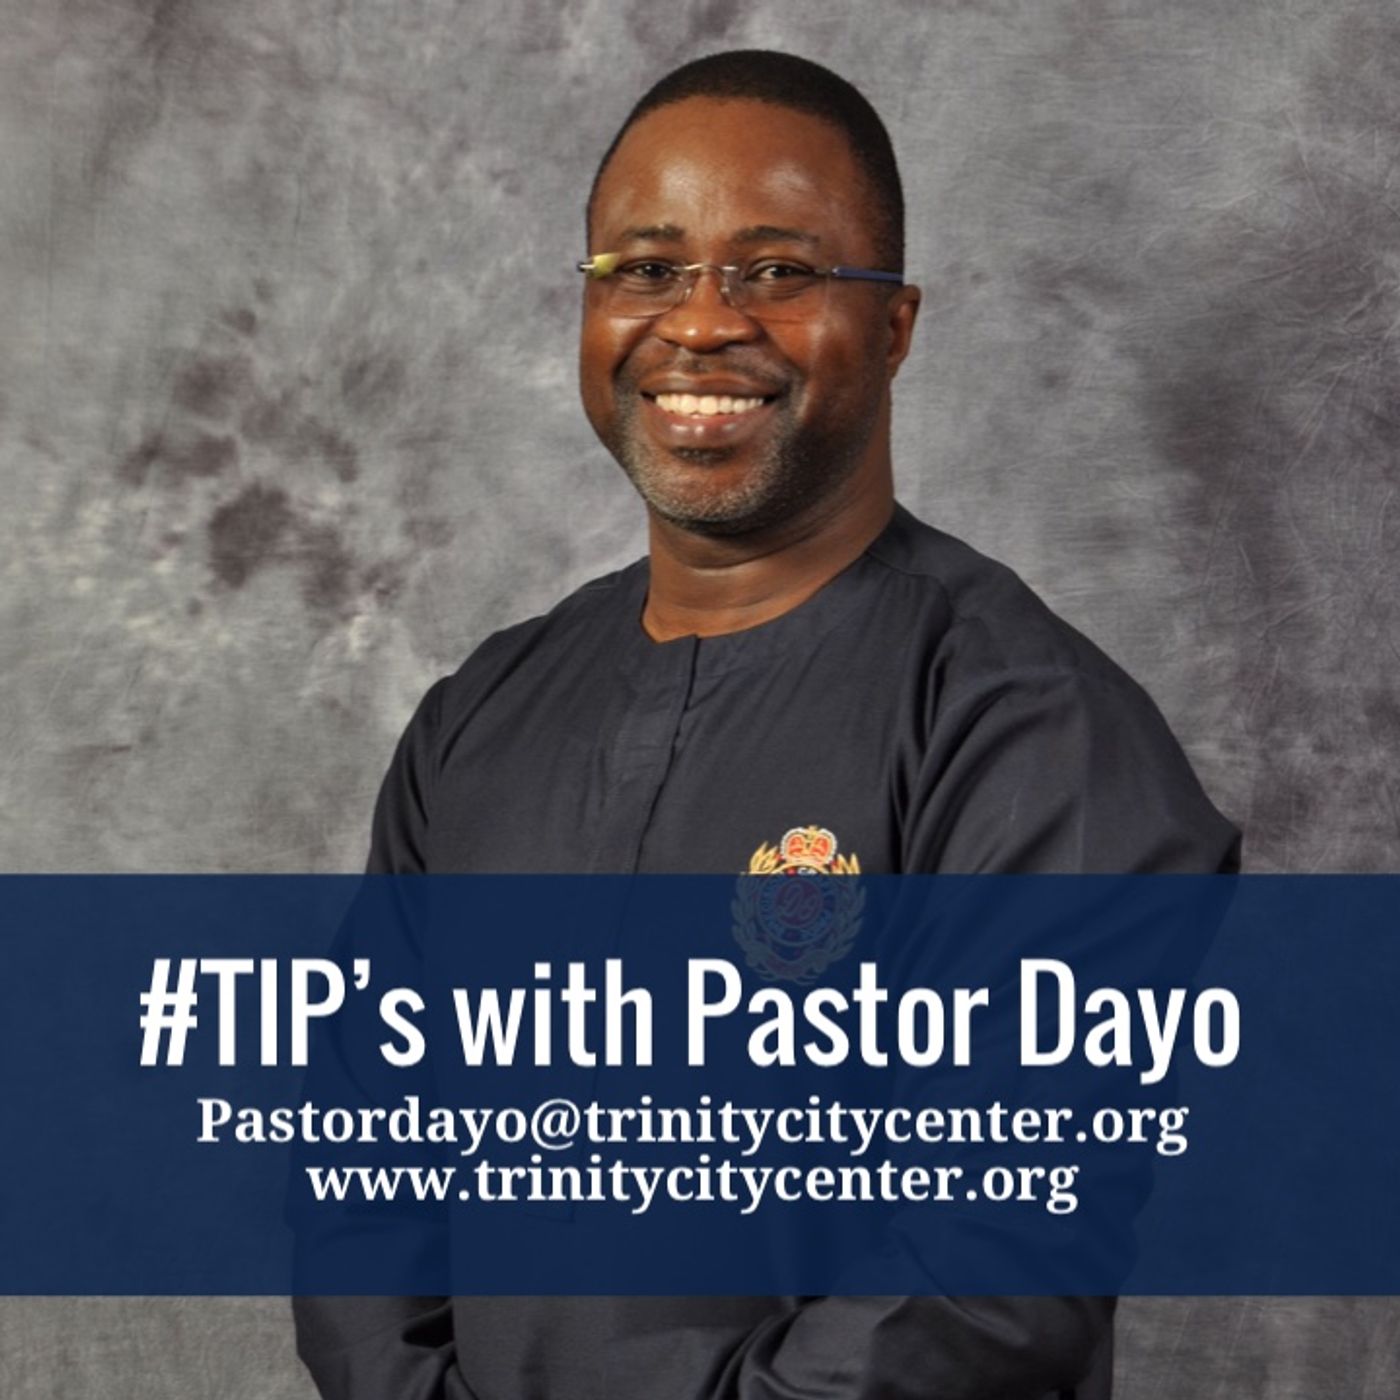 Episode 31 - TIP’s with Pastor Dayo